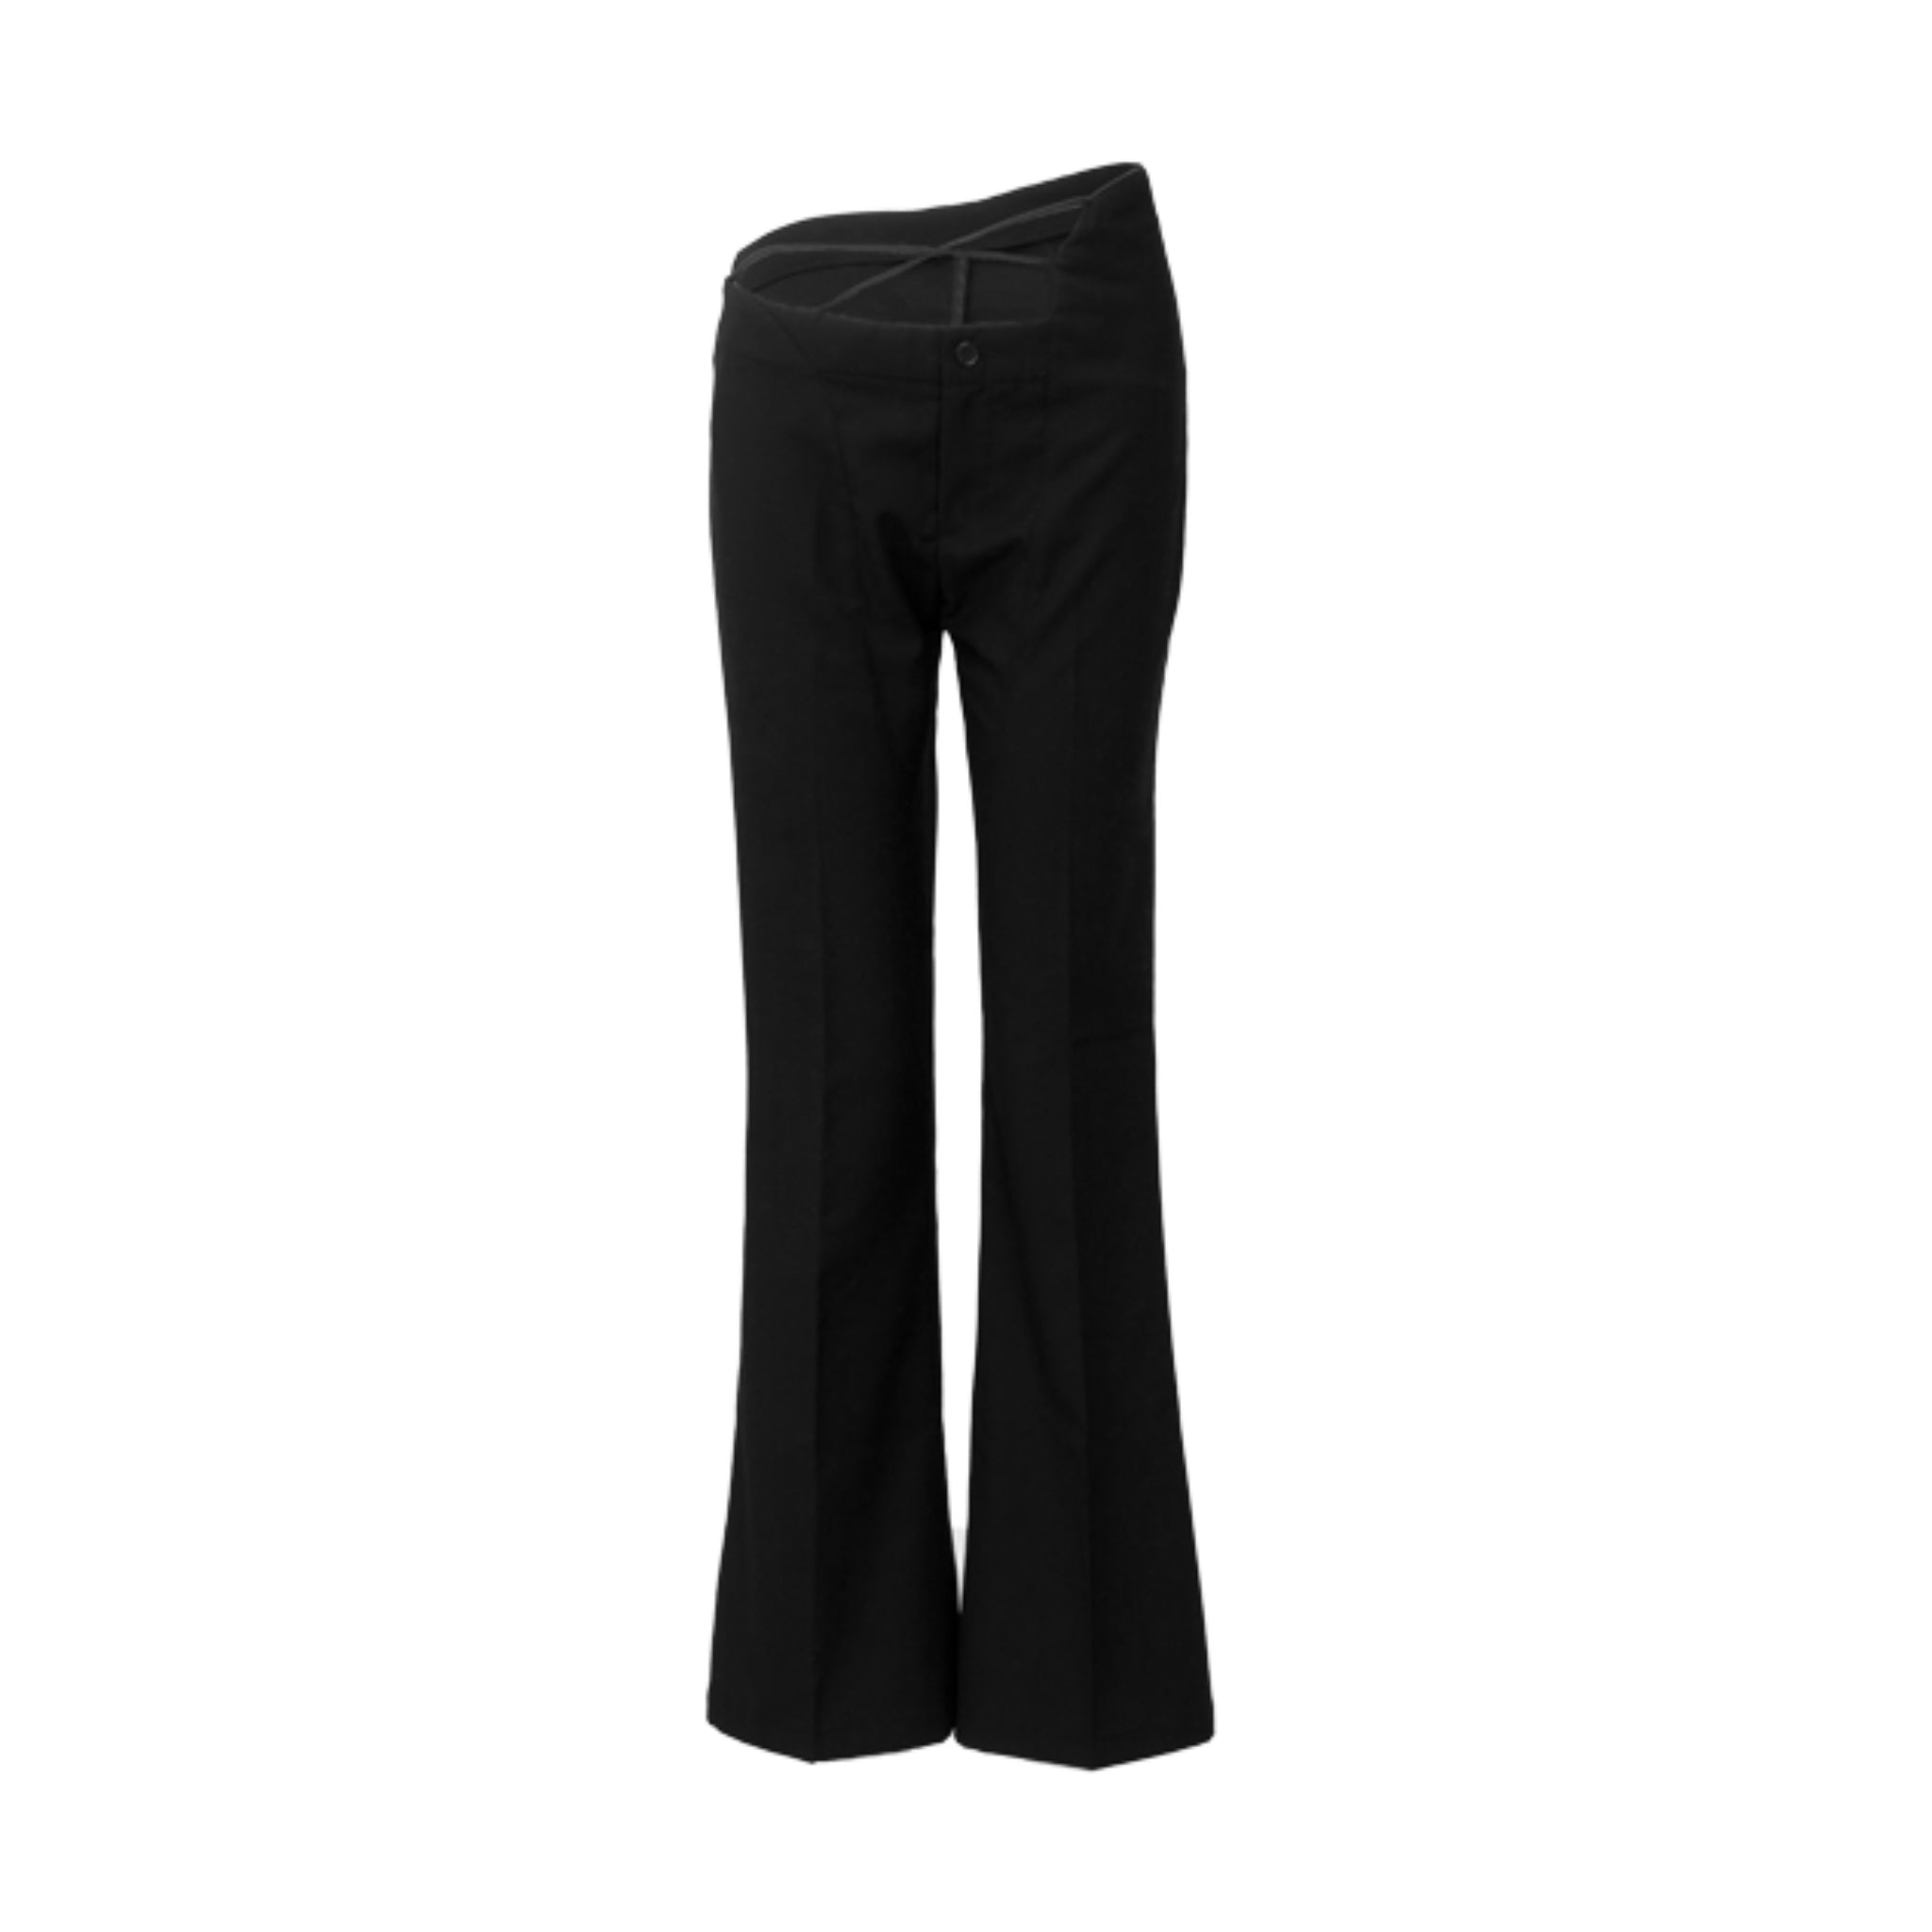 ANN ANDELMAN Black Strappy Suit Pants | MADA IN CHINA